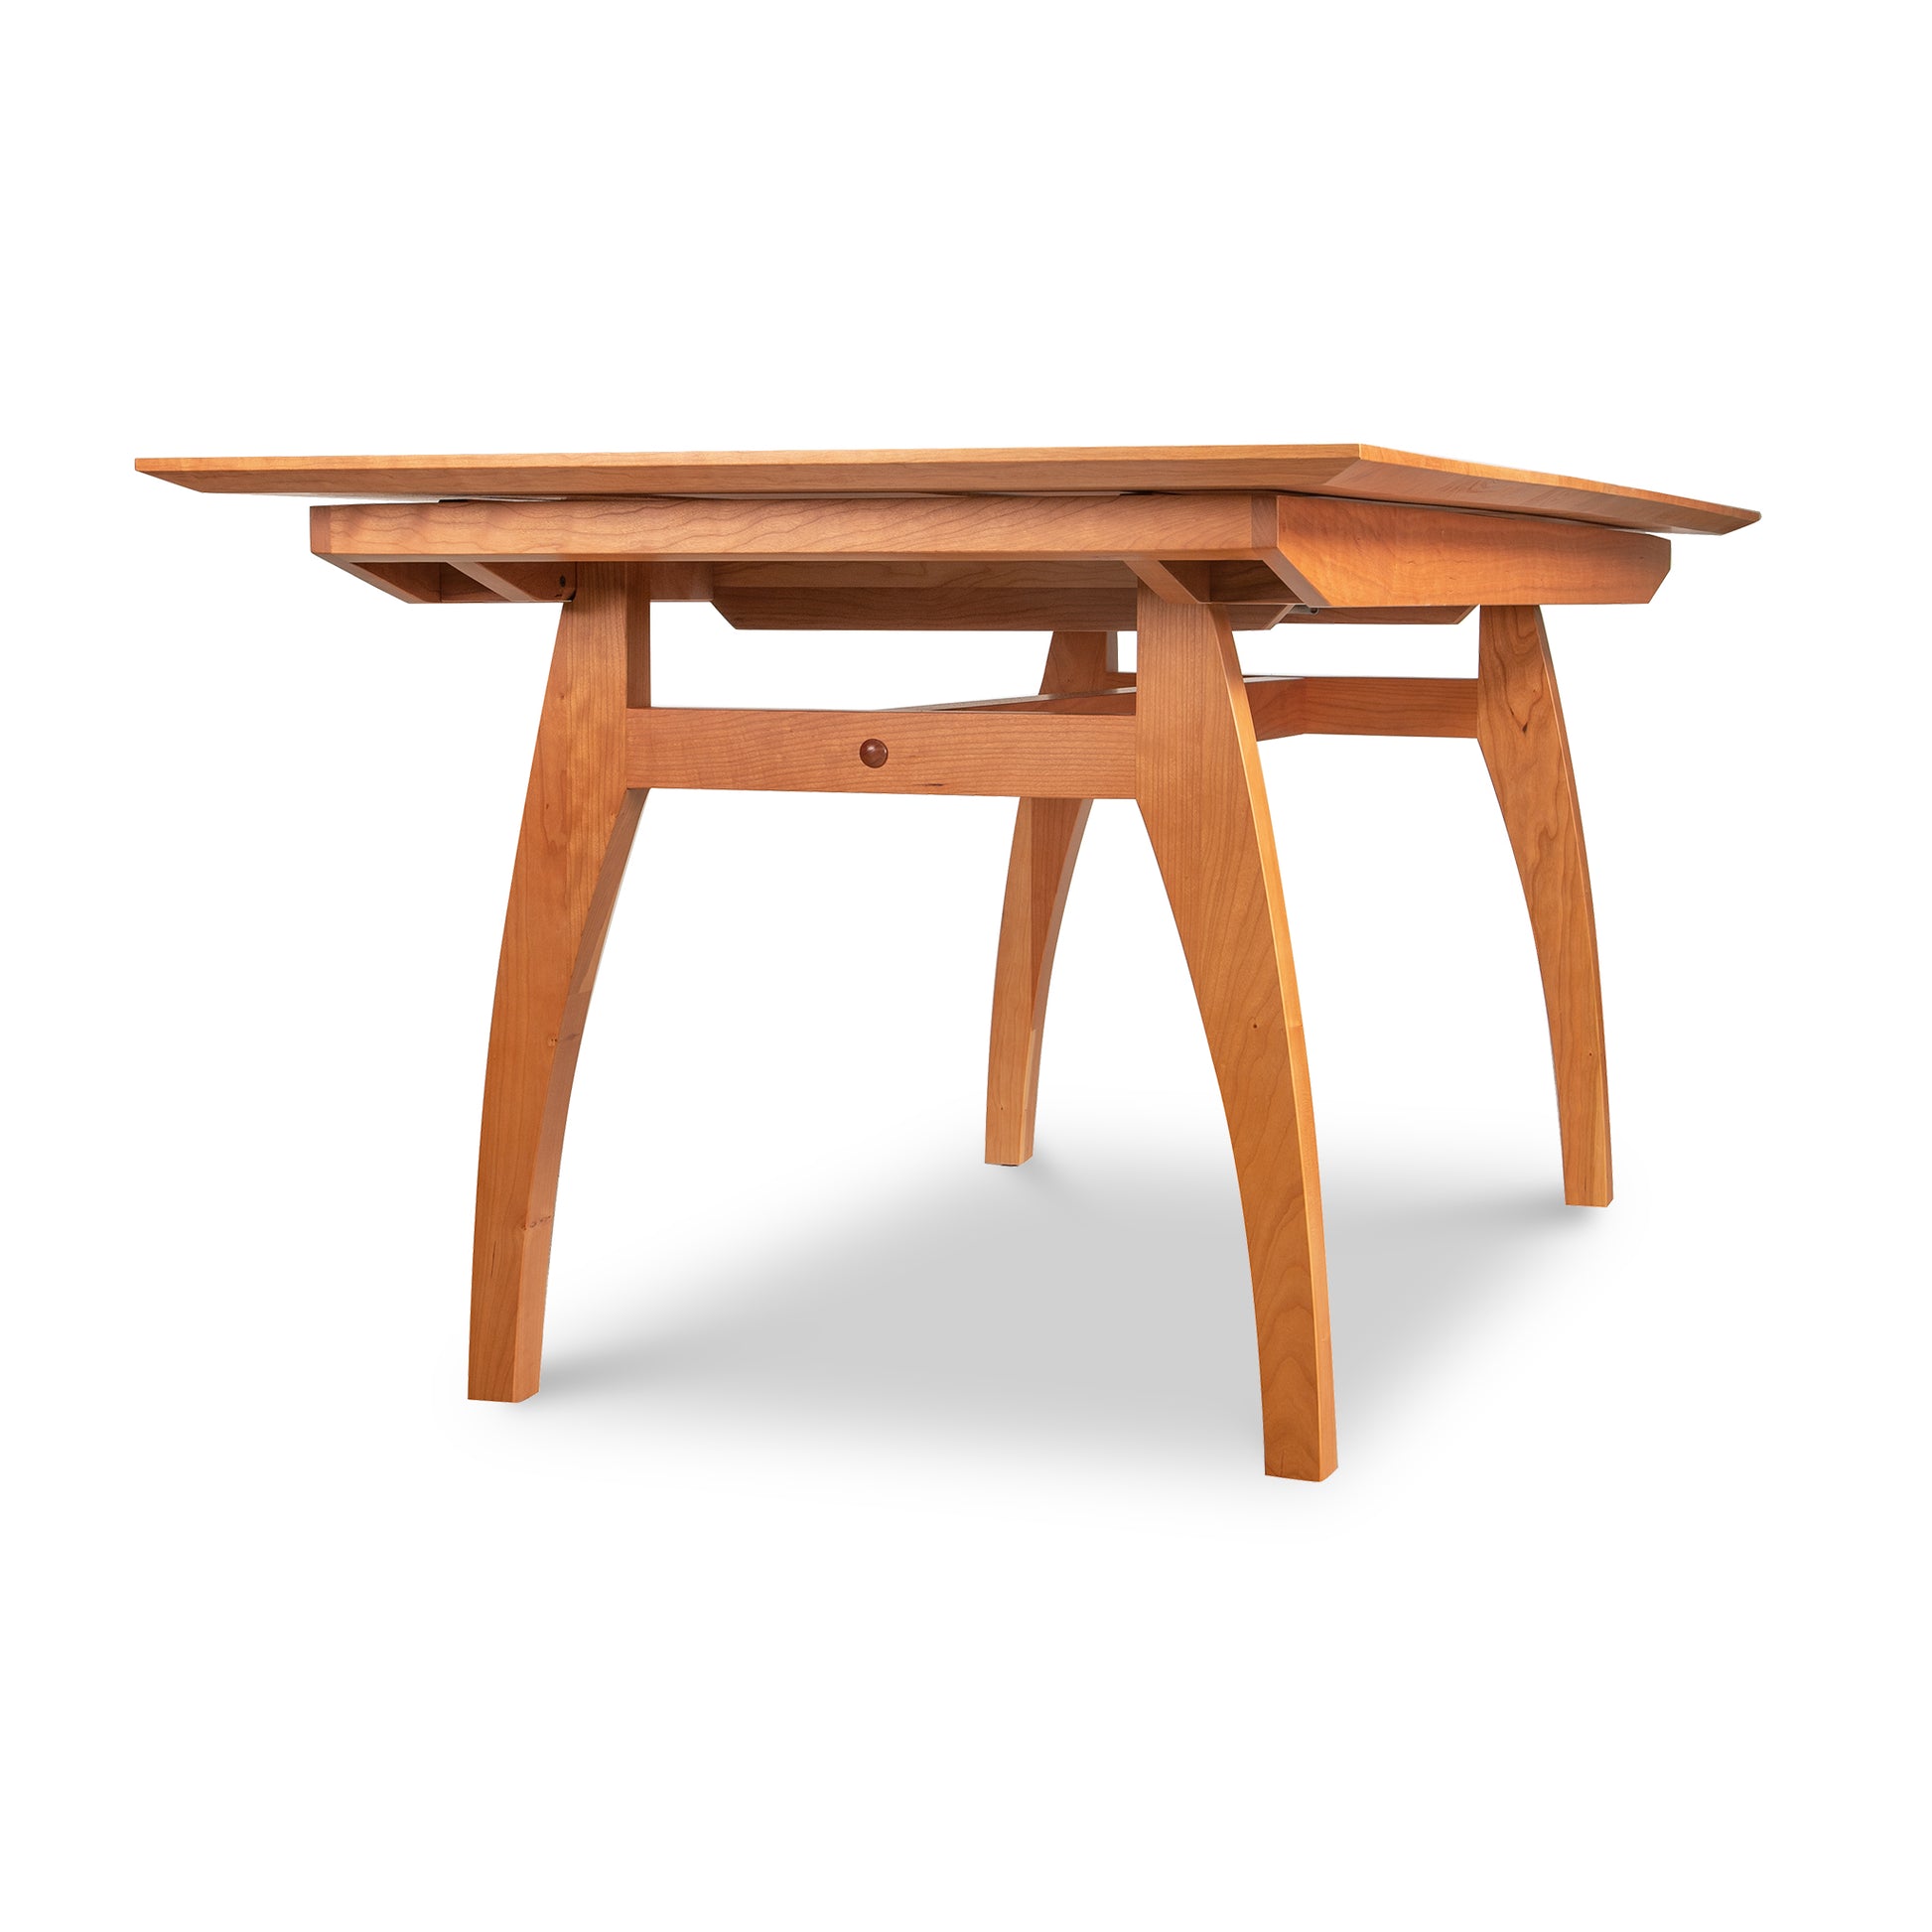 A Lyndon Furniture Vermont Modern Butterfly Extension Table with a high-end wooden top and legs.